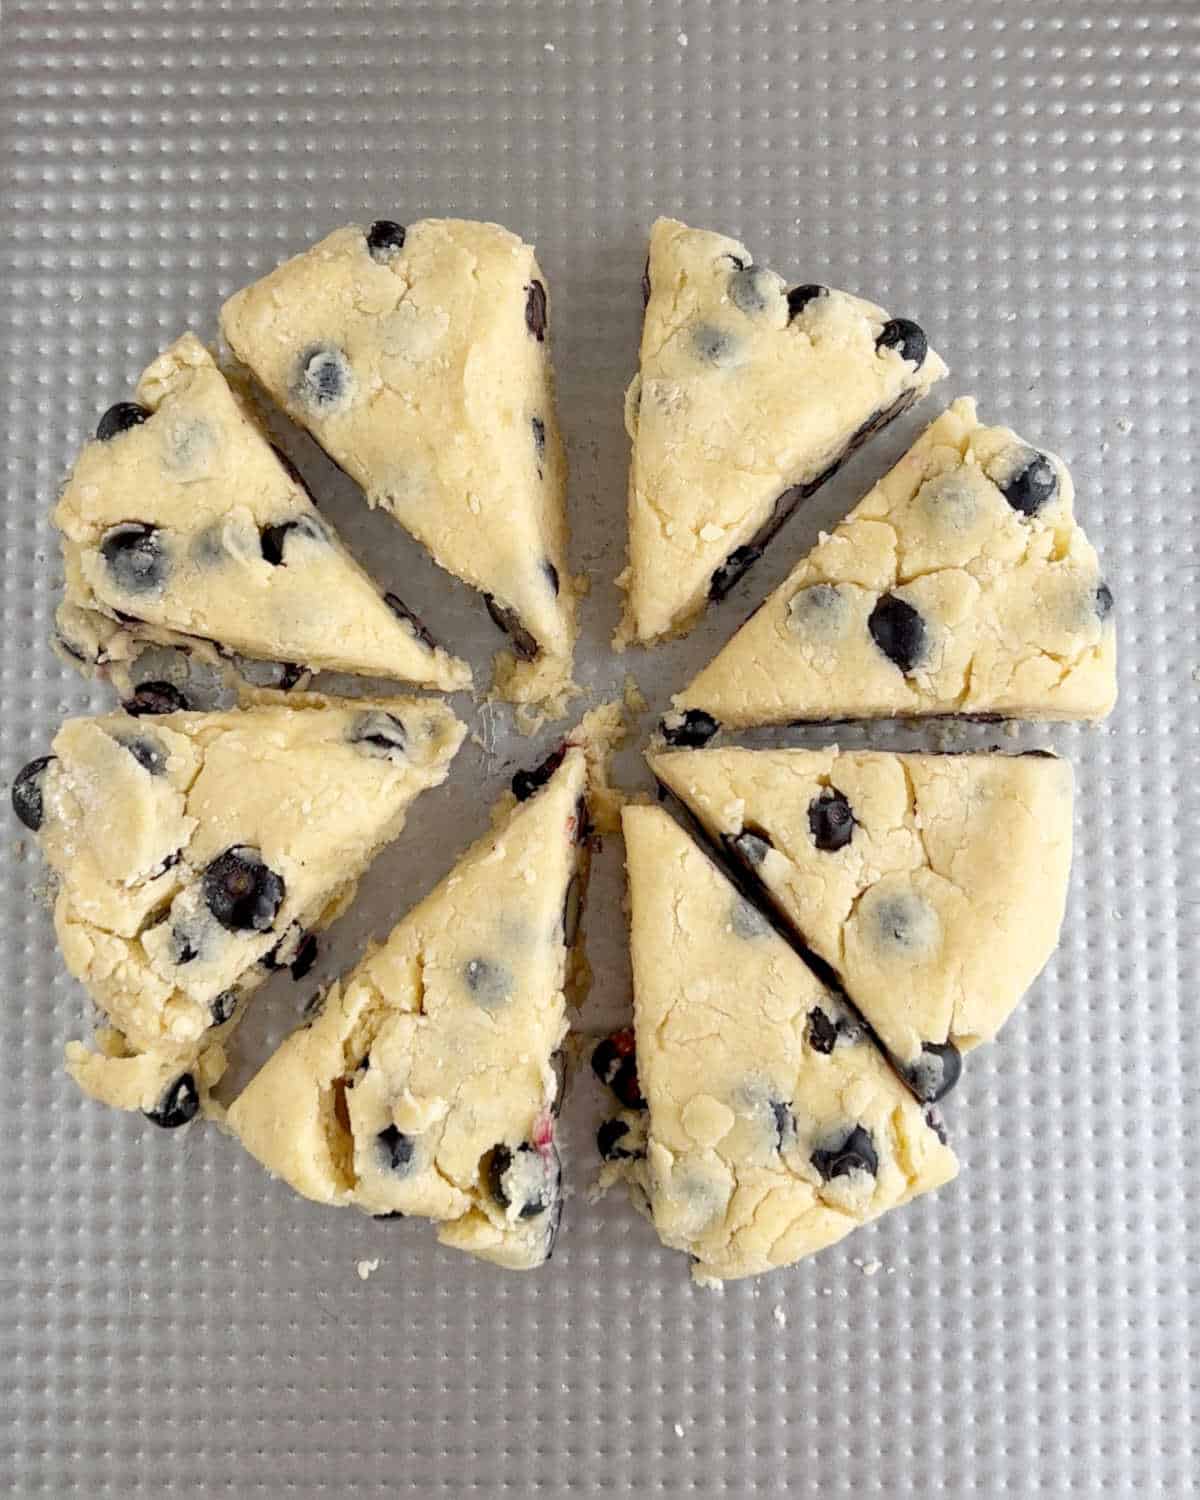 Metal sheet with round of blueberry scones cut into triangles.